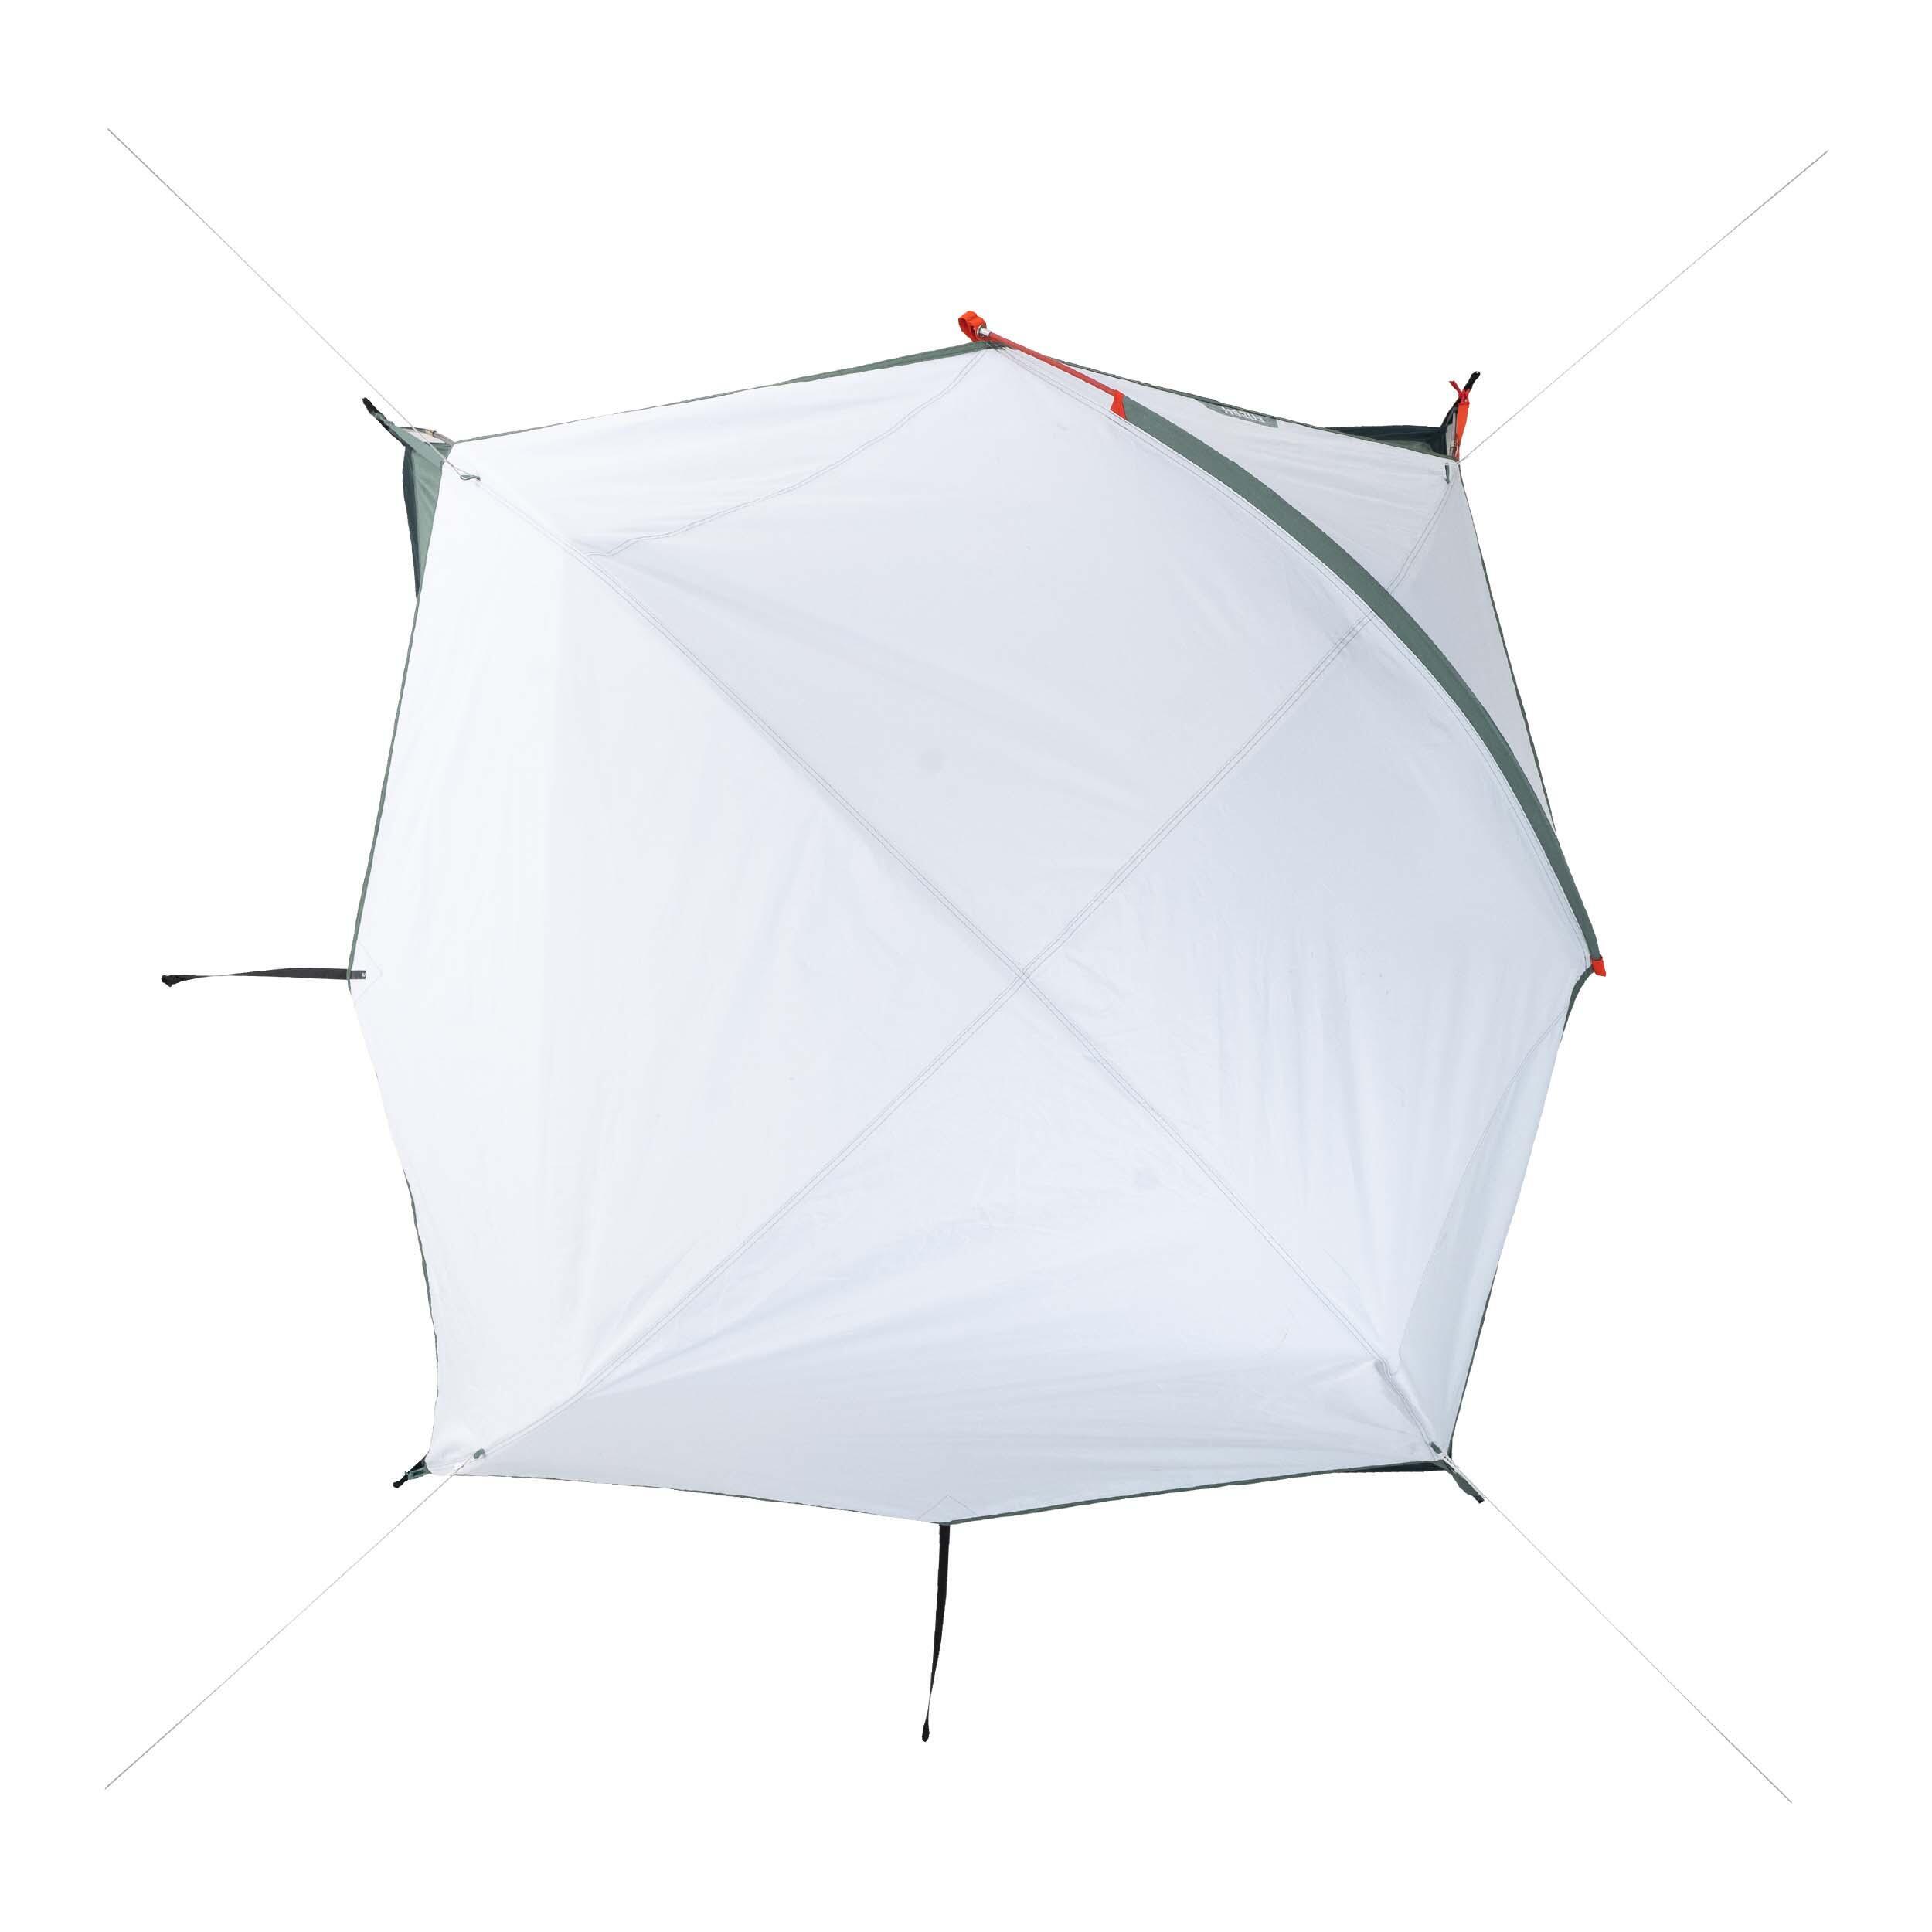 Camping tent - MH100  - 3-person - Fresh 23/24